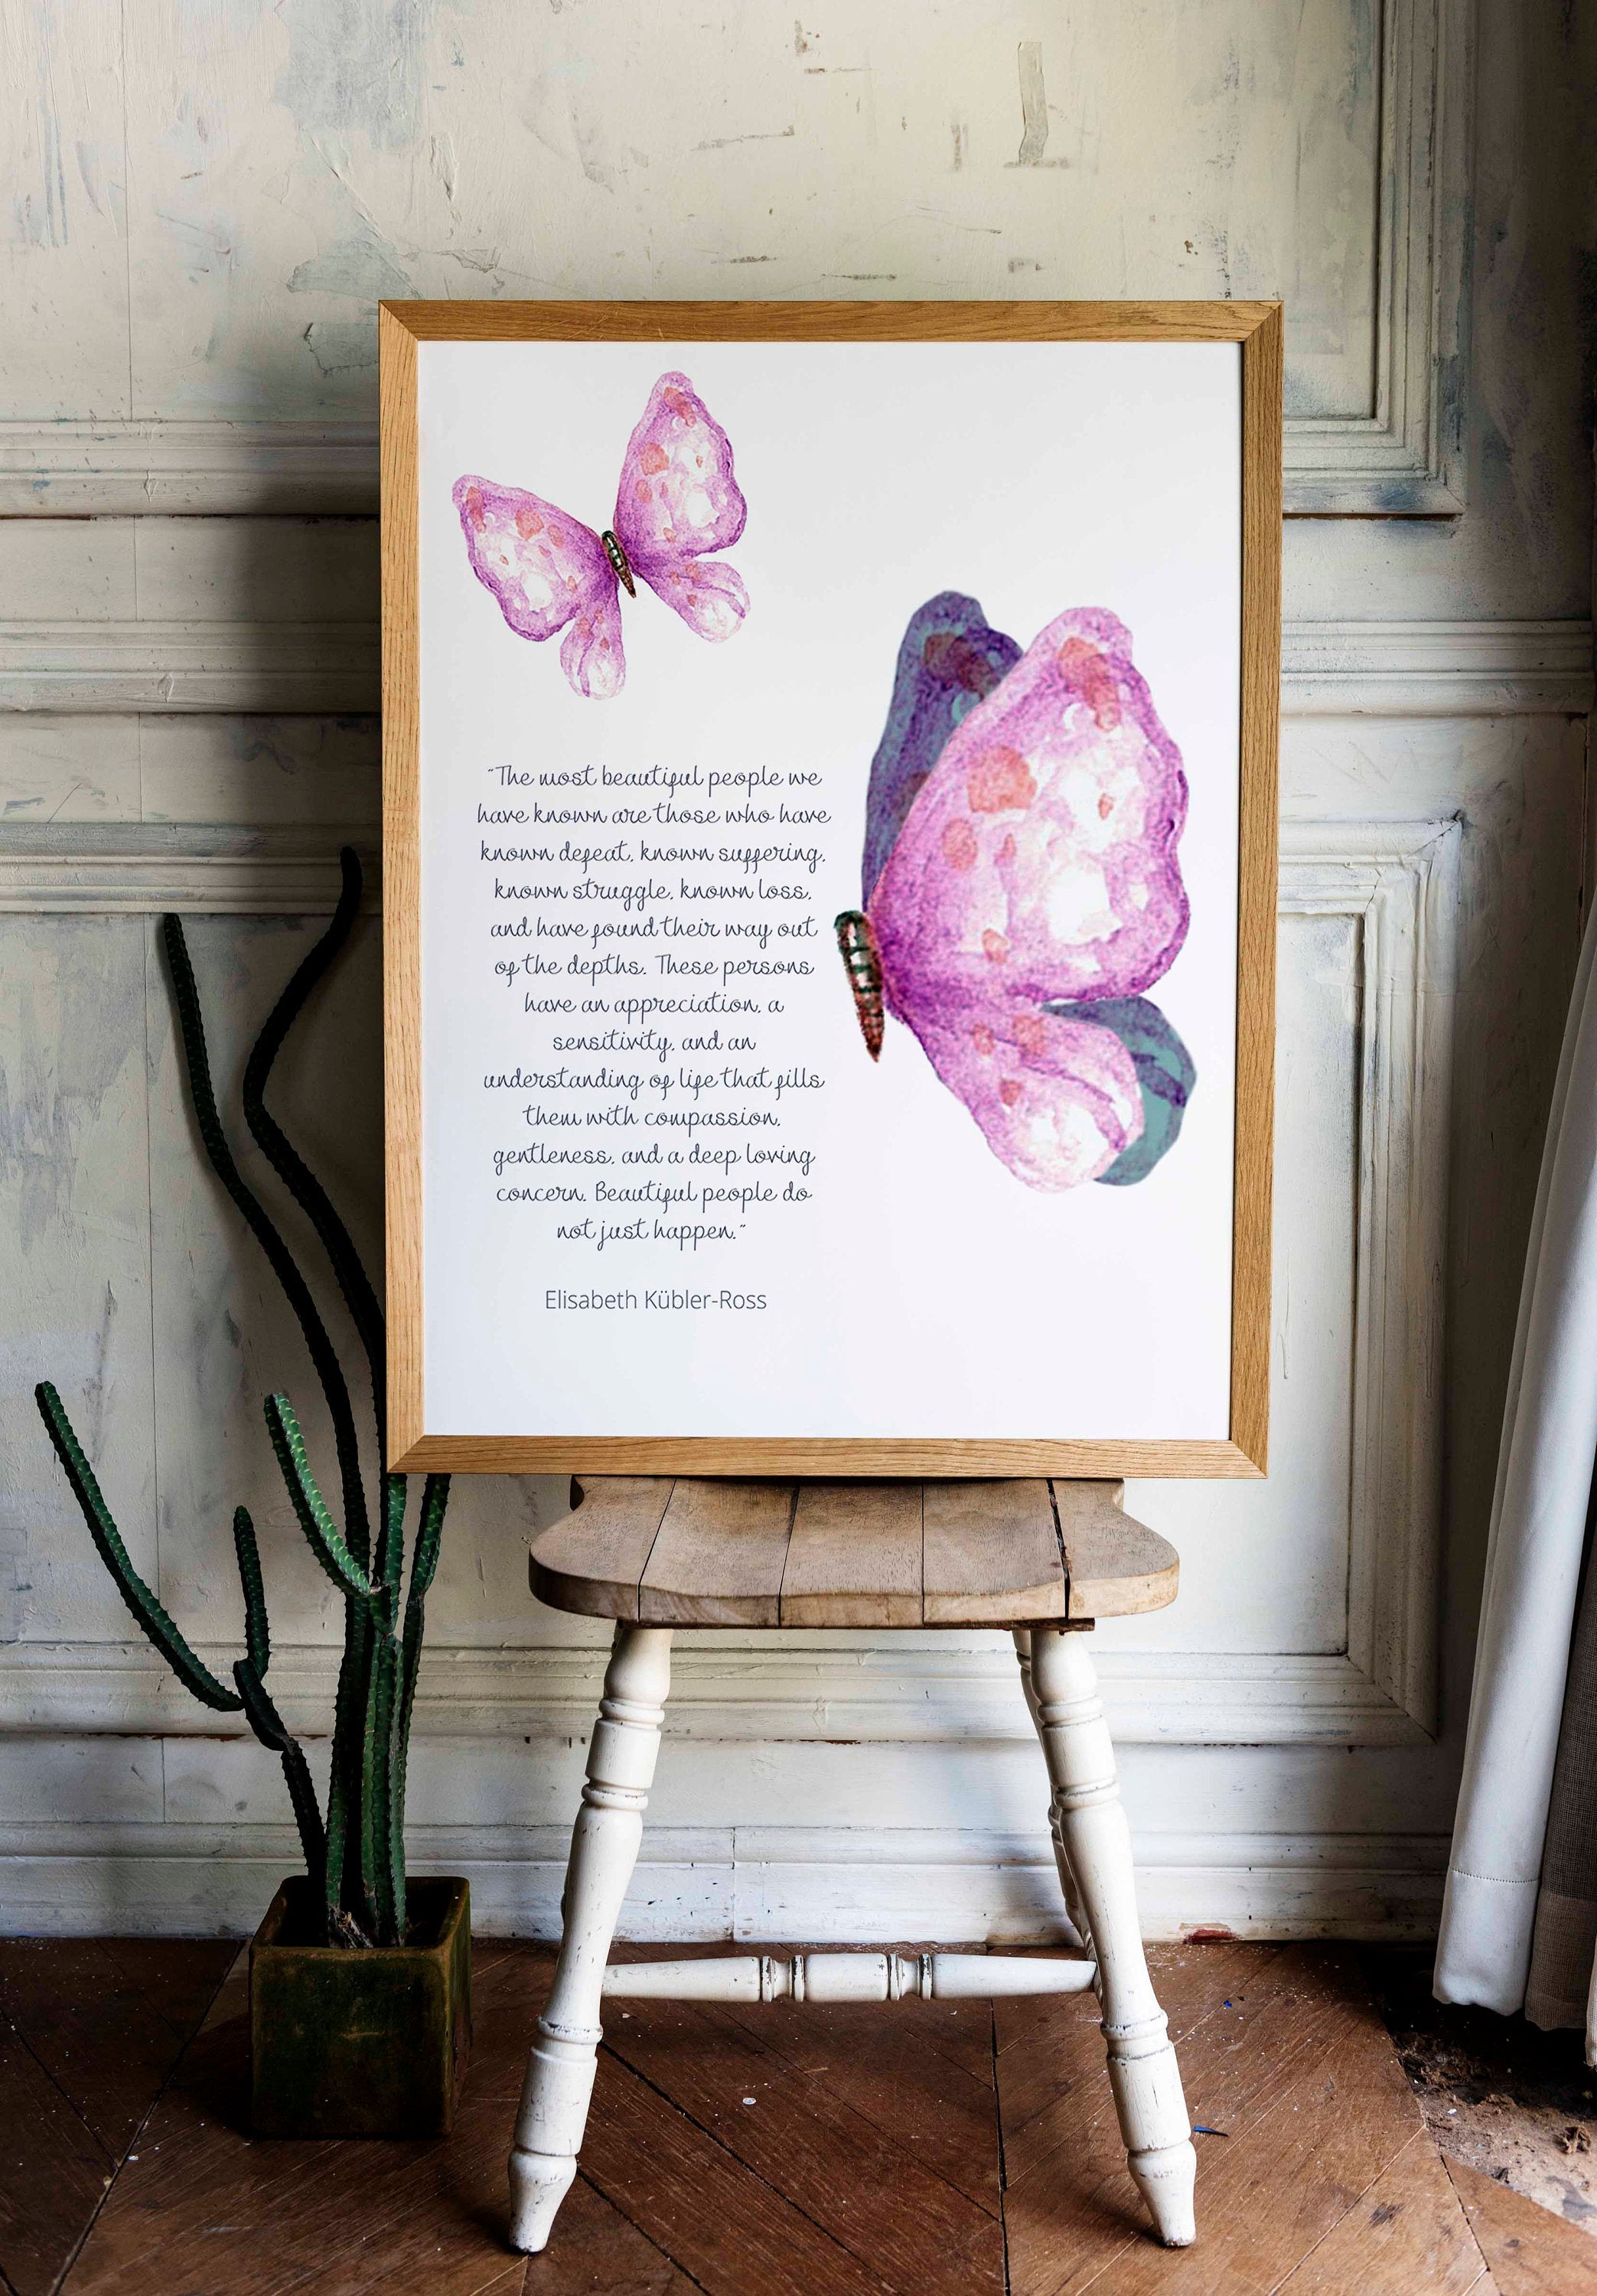 Butterfly Inspirational Wall Art Prints Most Beautiful People Elisabeth Kubler-Ross Quote